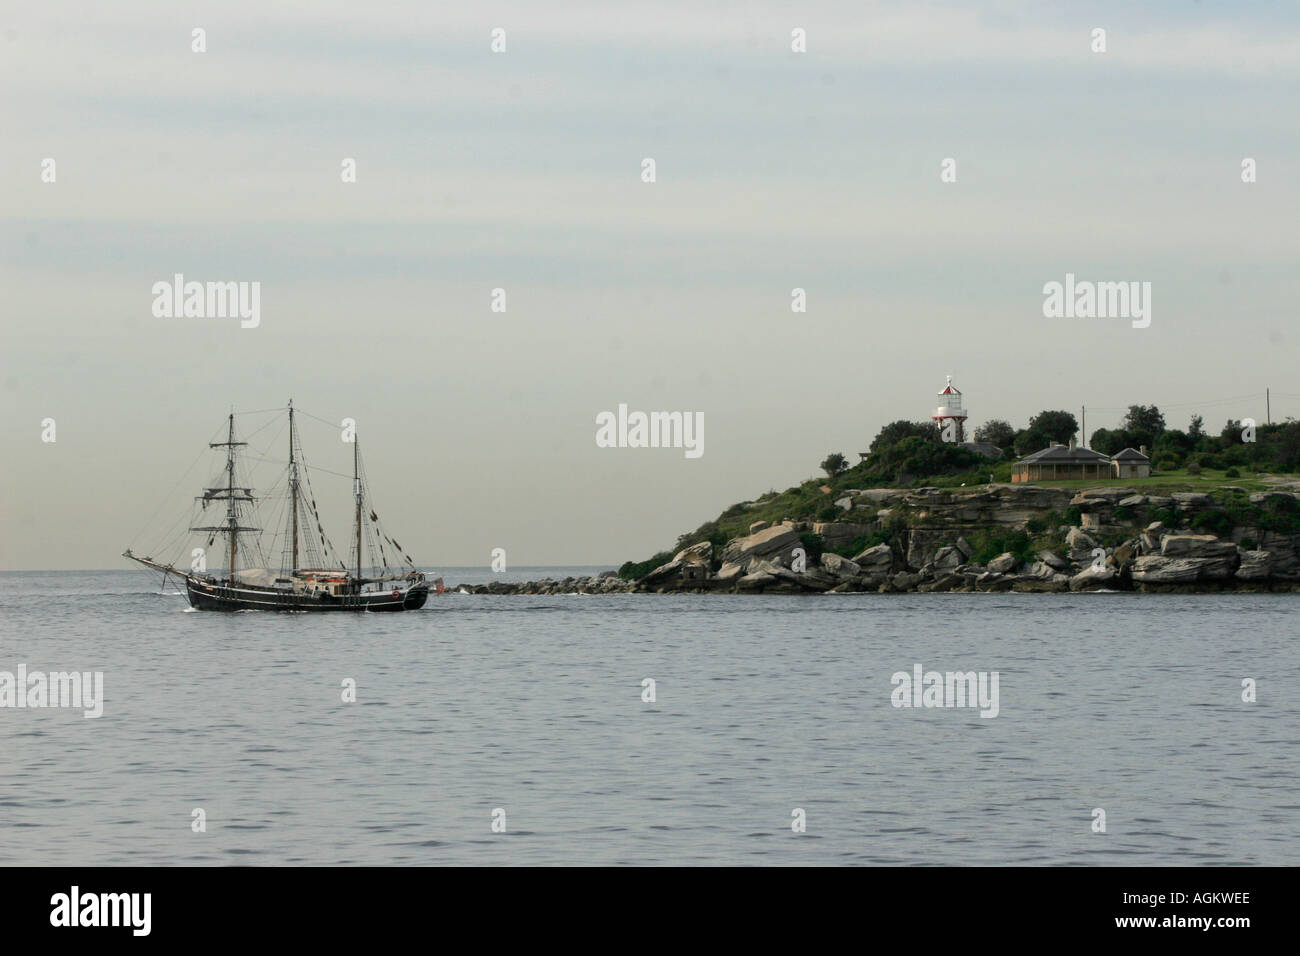 The South head of Sydney harbor with square rigged sailing ship Stock Photo